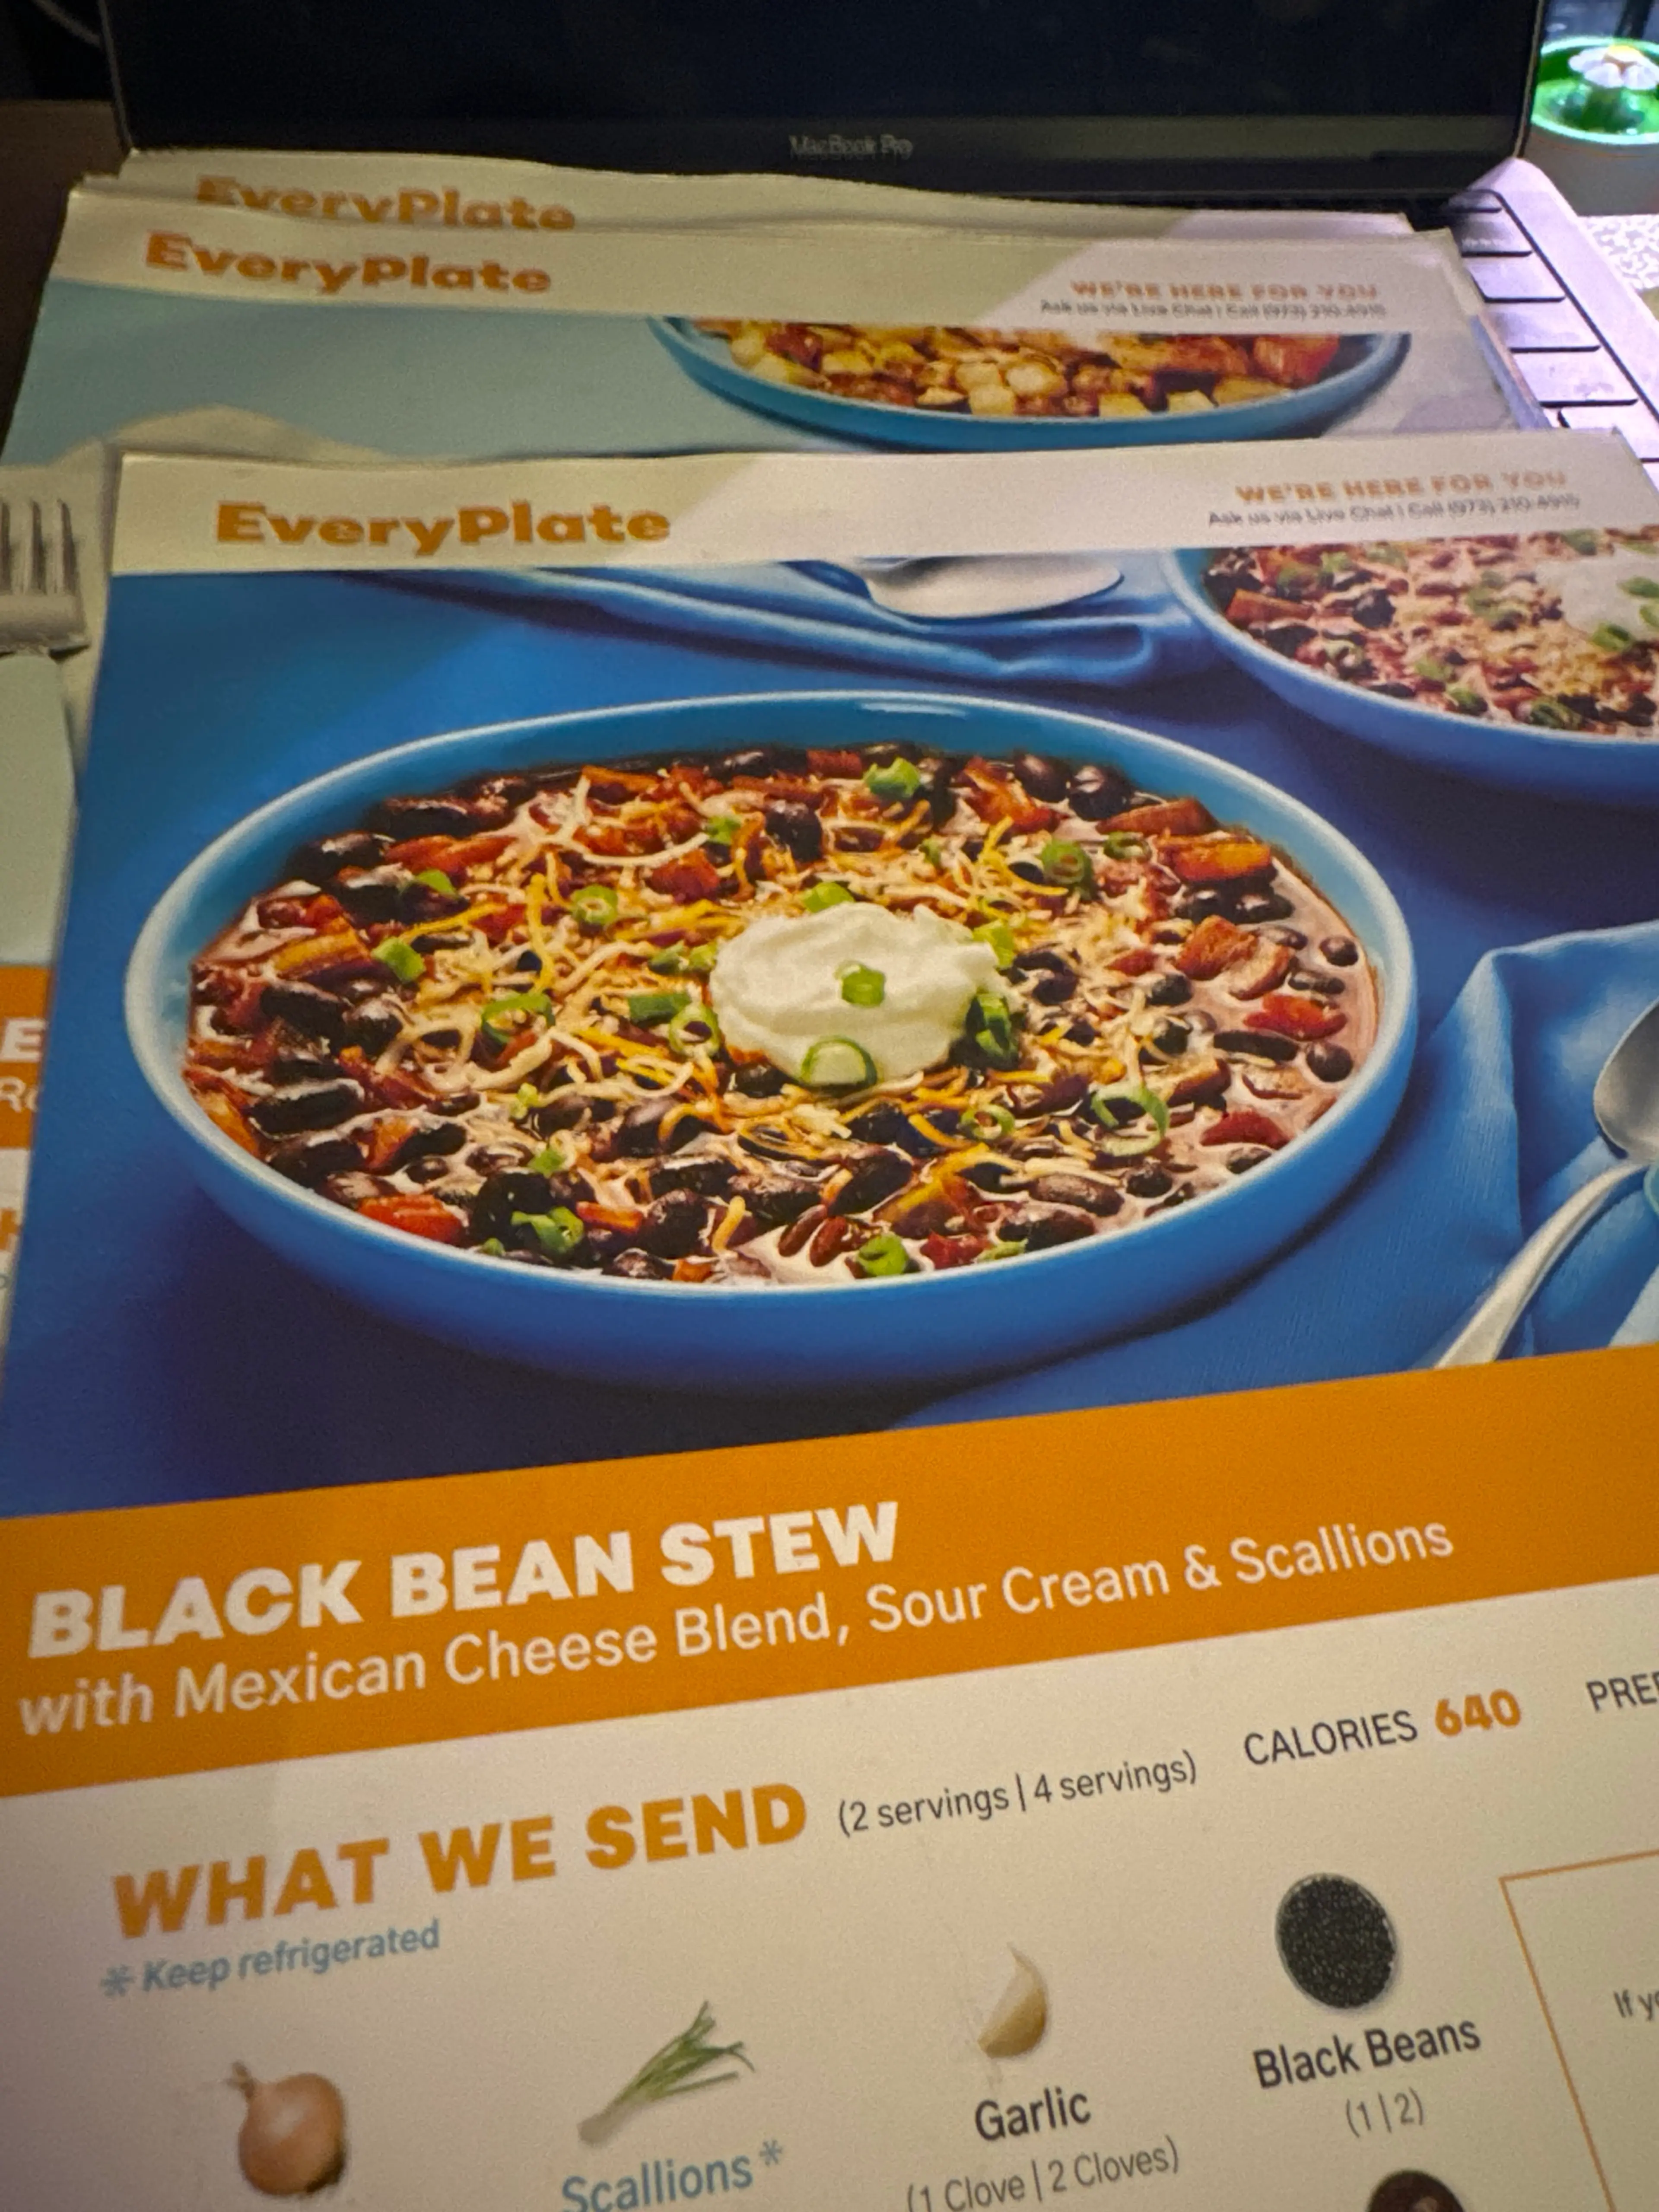 BLACK BEAN STEW with Mexican Cheese Blend, Sour Cream & Scal